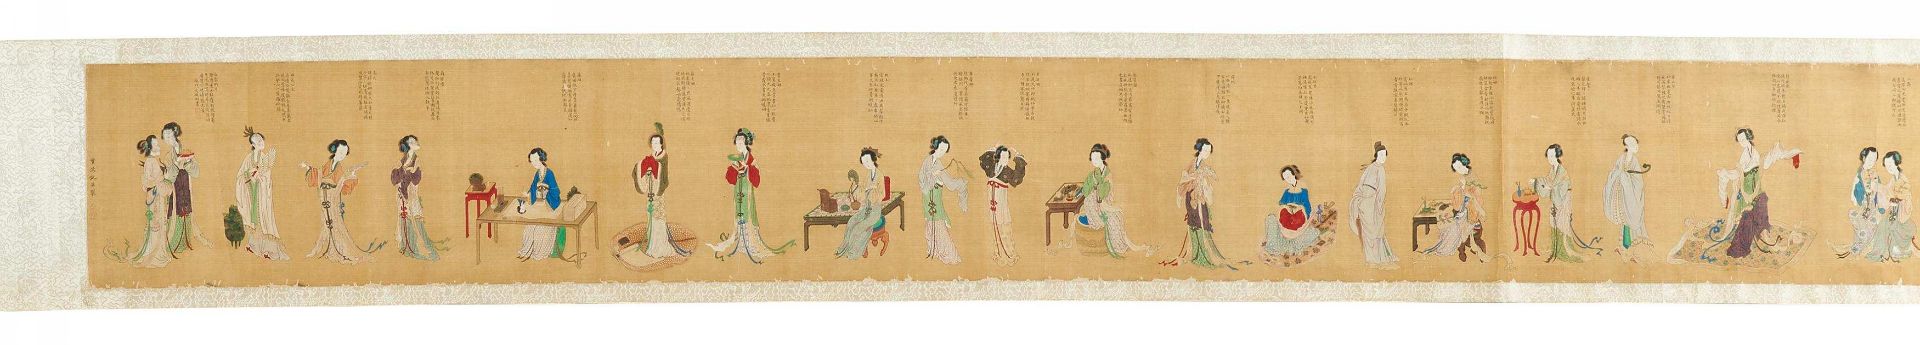 QIU, YING ~1494 - 1552 - attributed. Beauties of Several Dynasties. China. Prob. Ming dynasty.